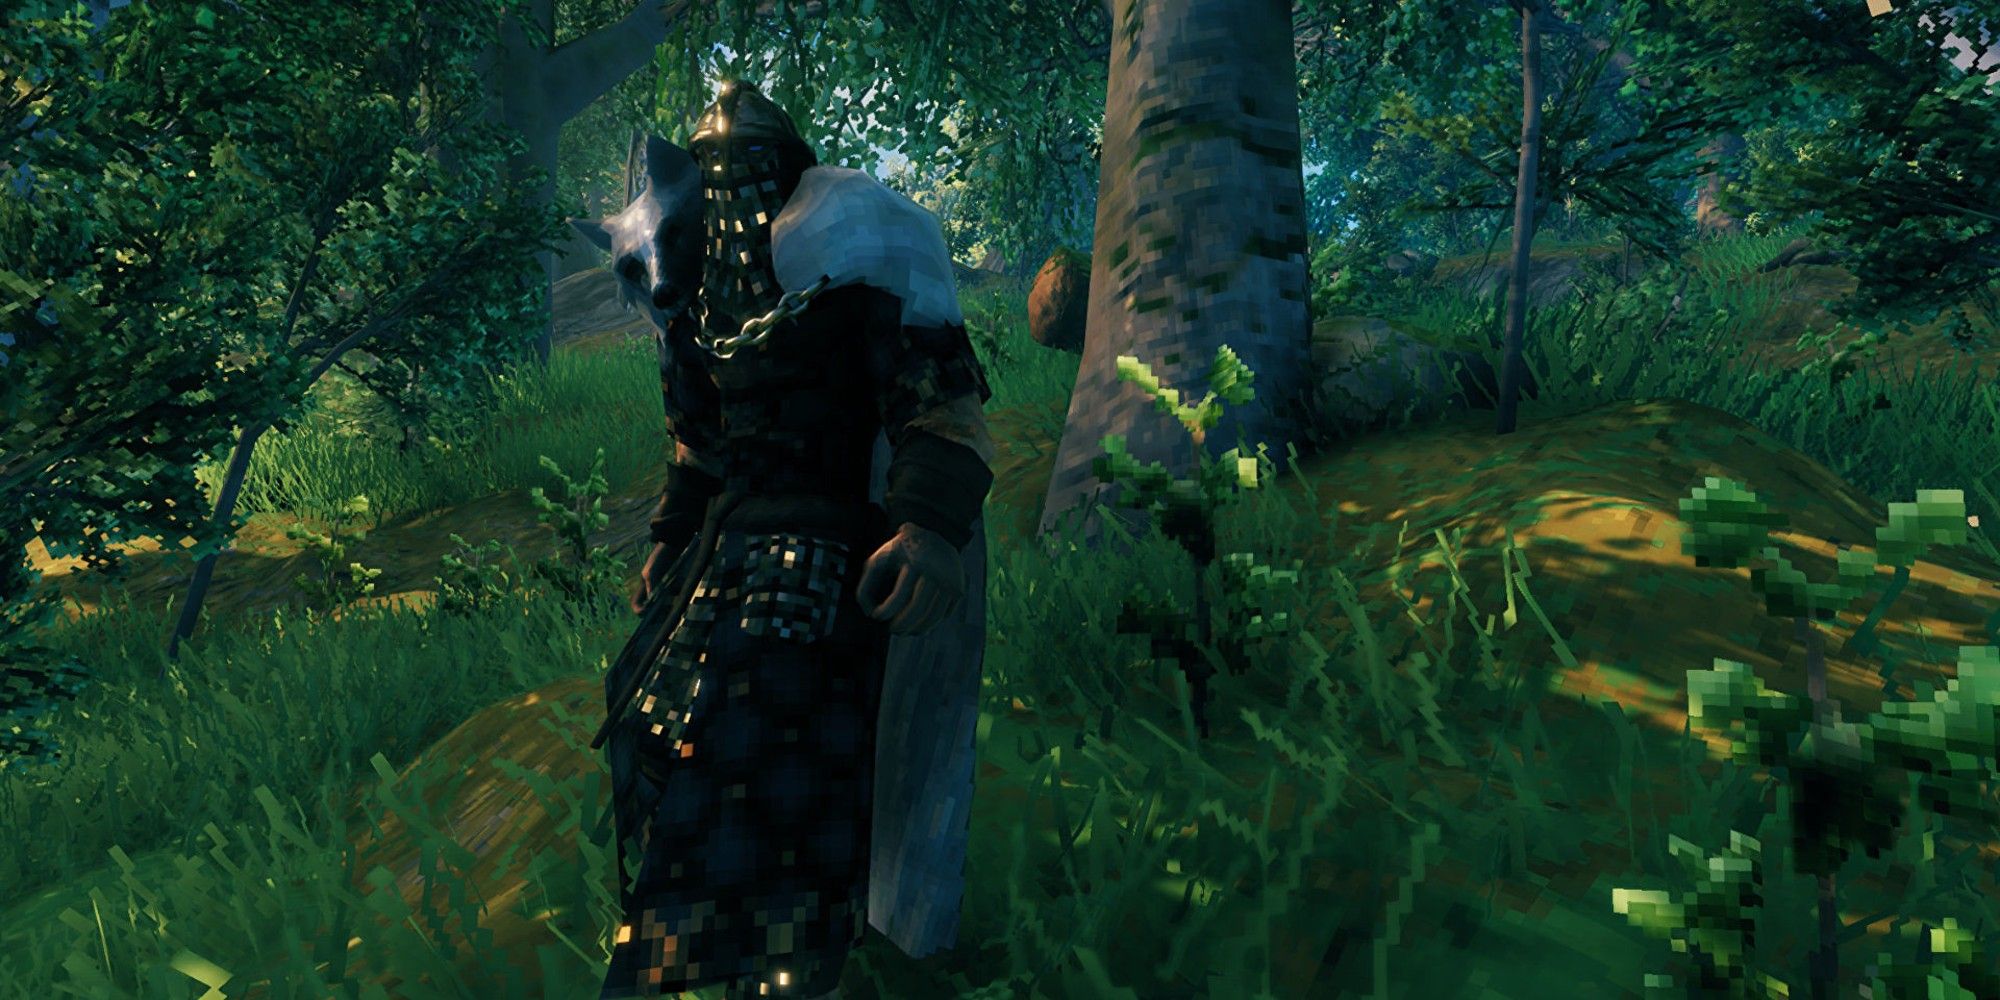 A player wears Padded Armor in the Meadows biome of Valheim